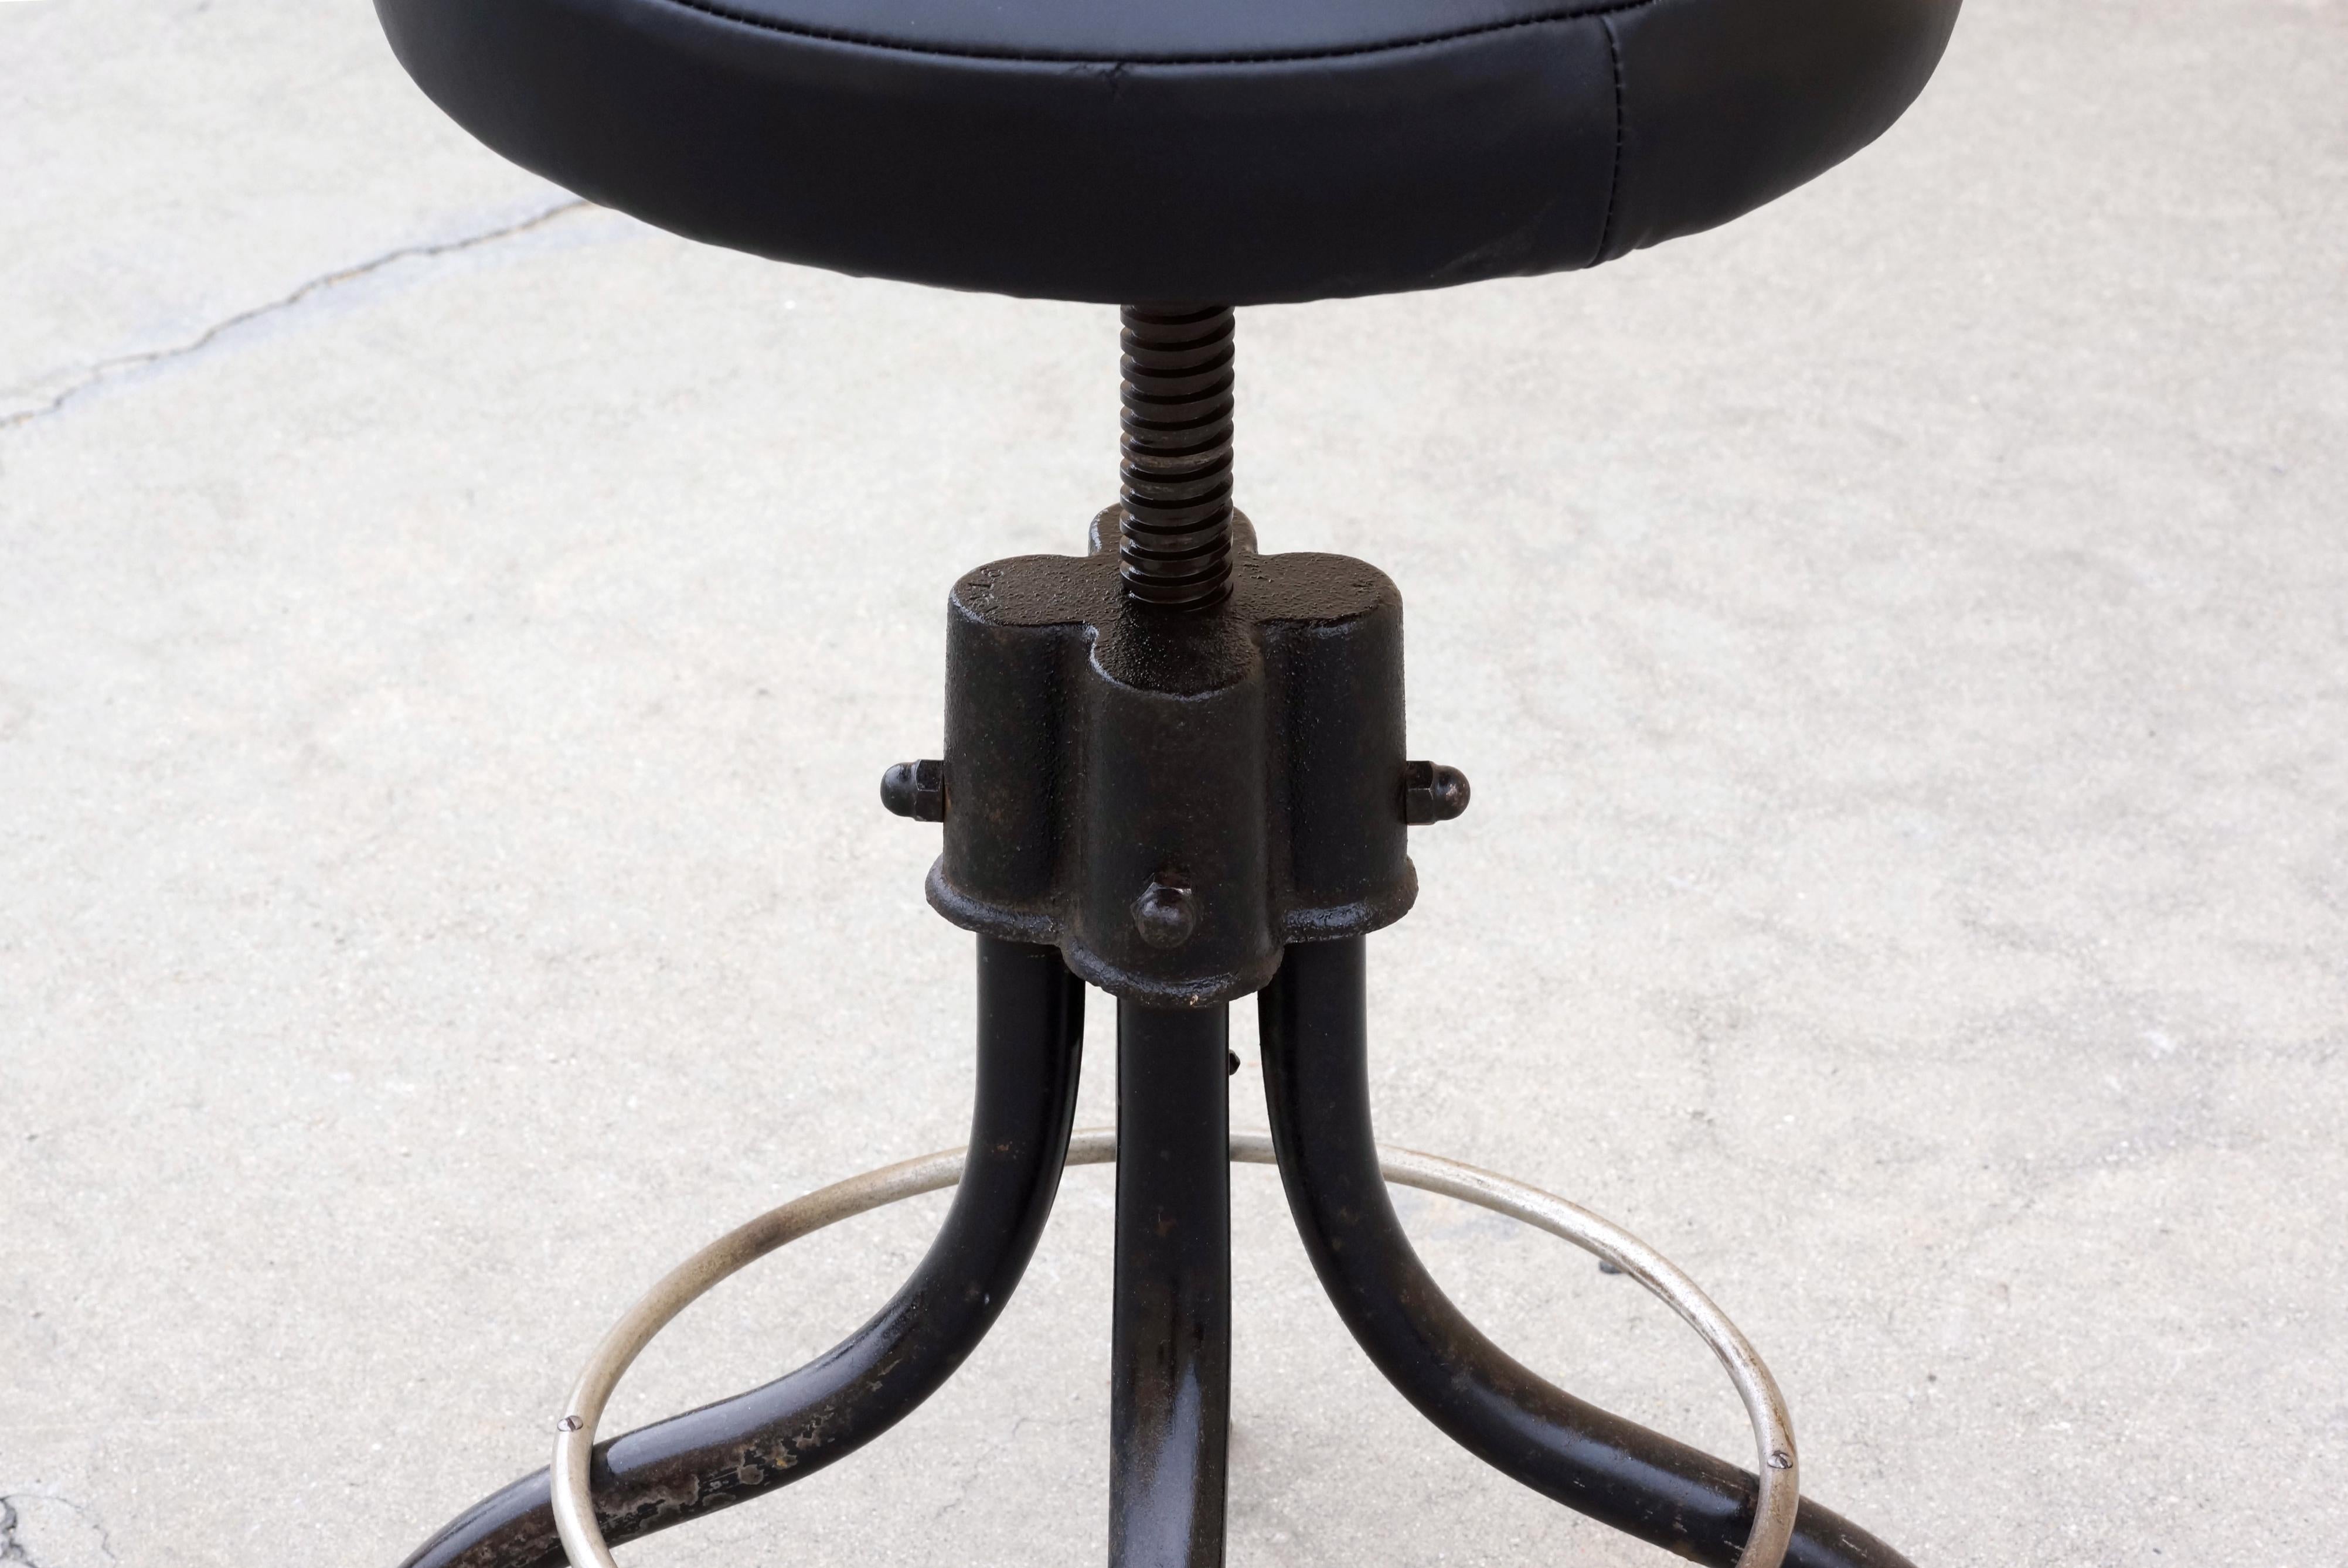 Machine Age shop stool with excellent vintage patina. Base has been lightly clear-coated to preserve its Industrial patina. Paired with a newly upholstered seat in black leather, circa 1940s.

Dimensions: 13